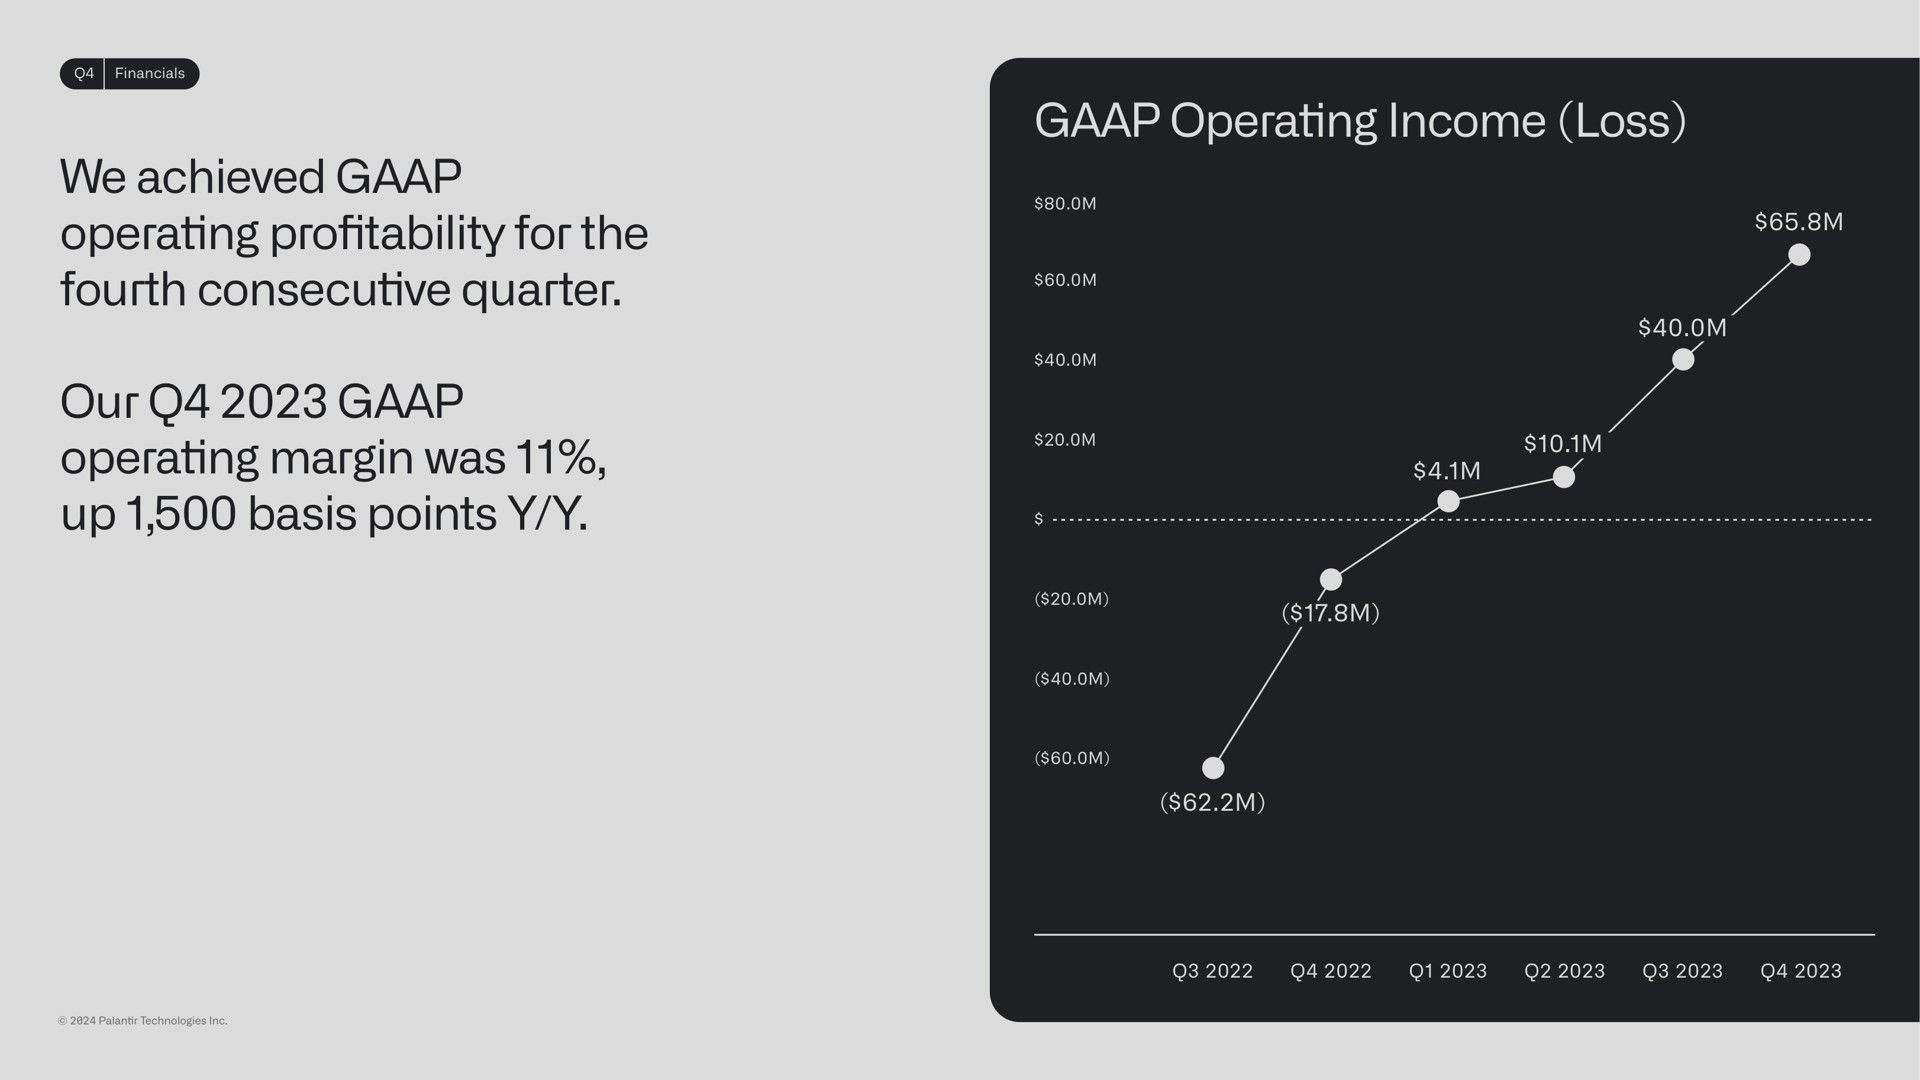 we achieved operating pro for the fourth consecutive quarter our operating margin was up basis points operating income loss profitability | Palantir